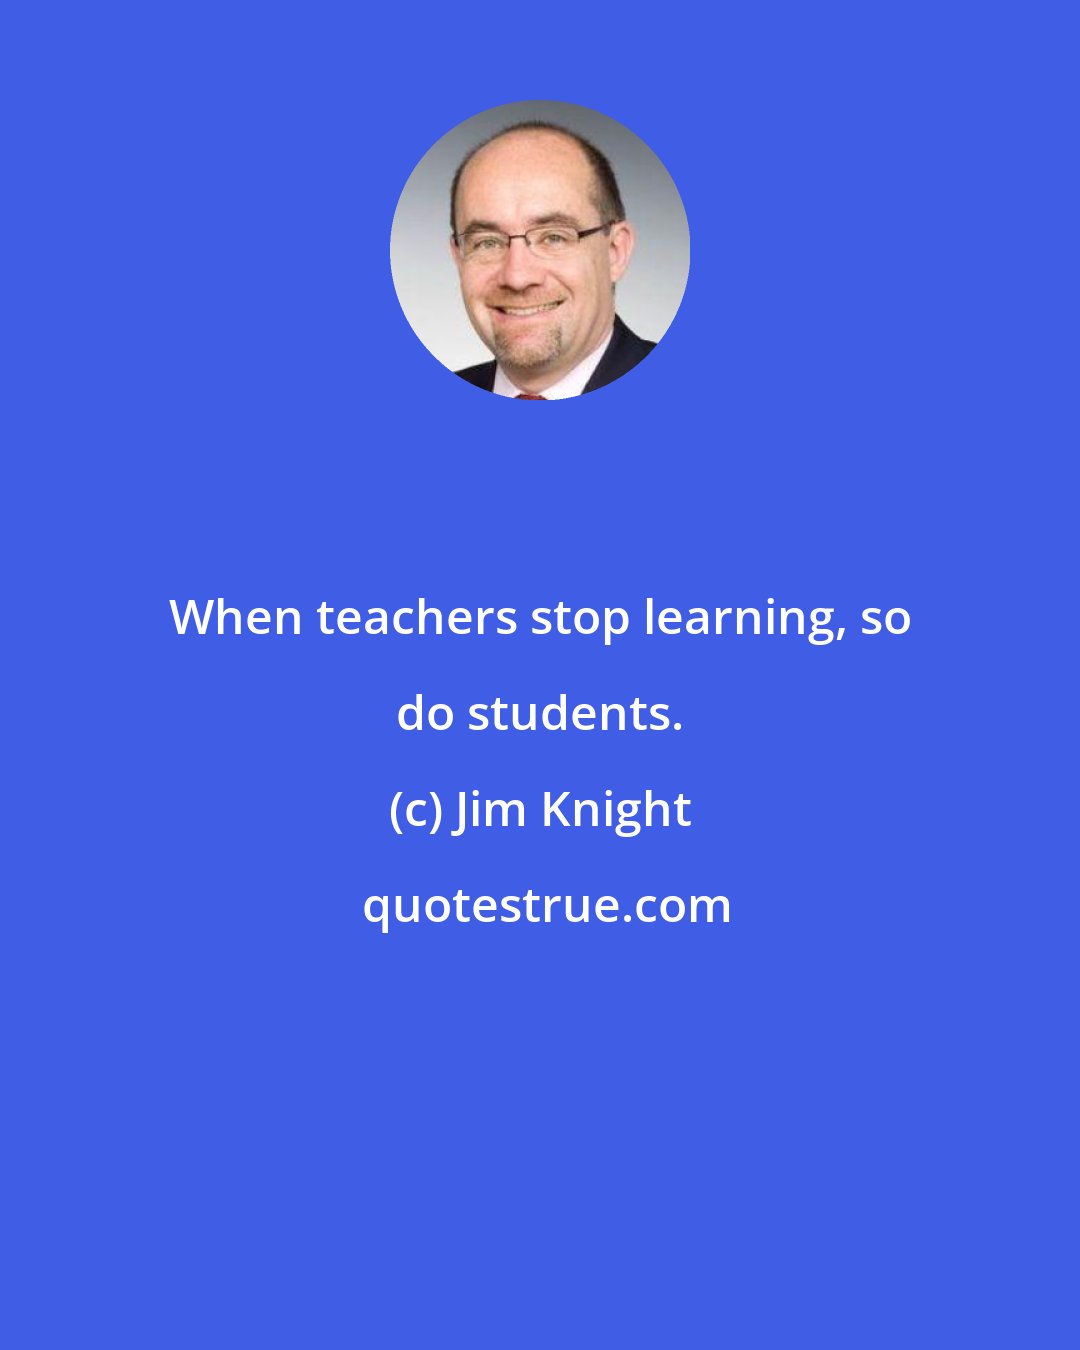 Jim Knight: When teachers stop learning, so do students.